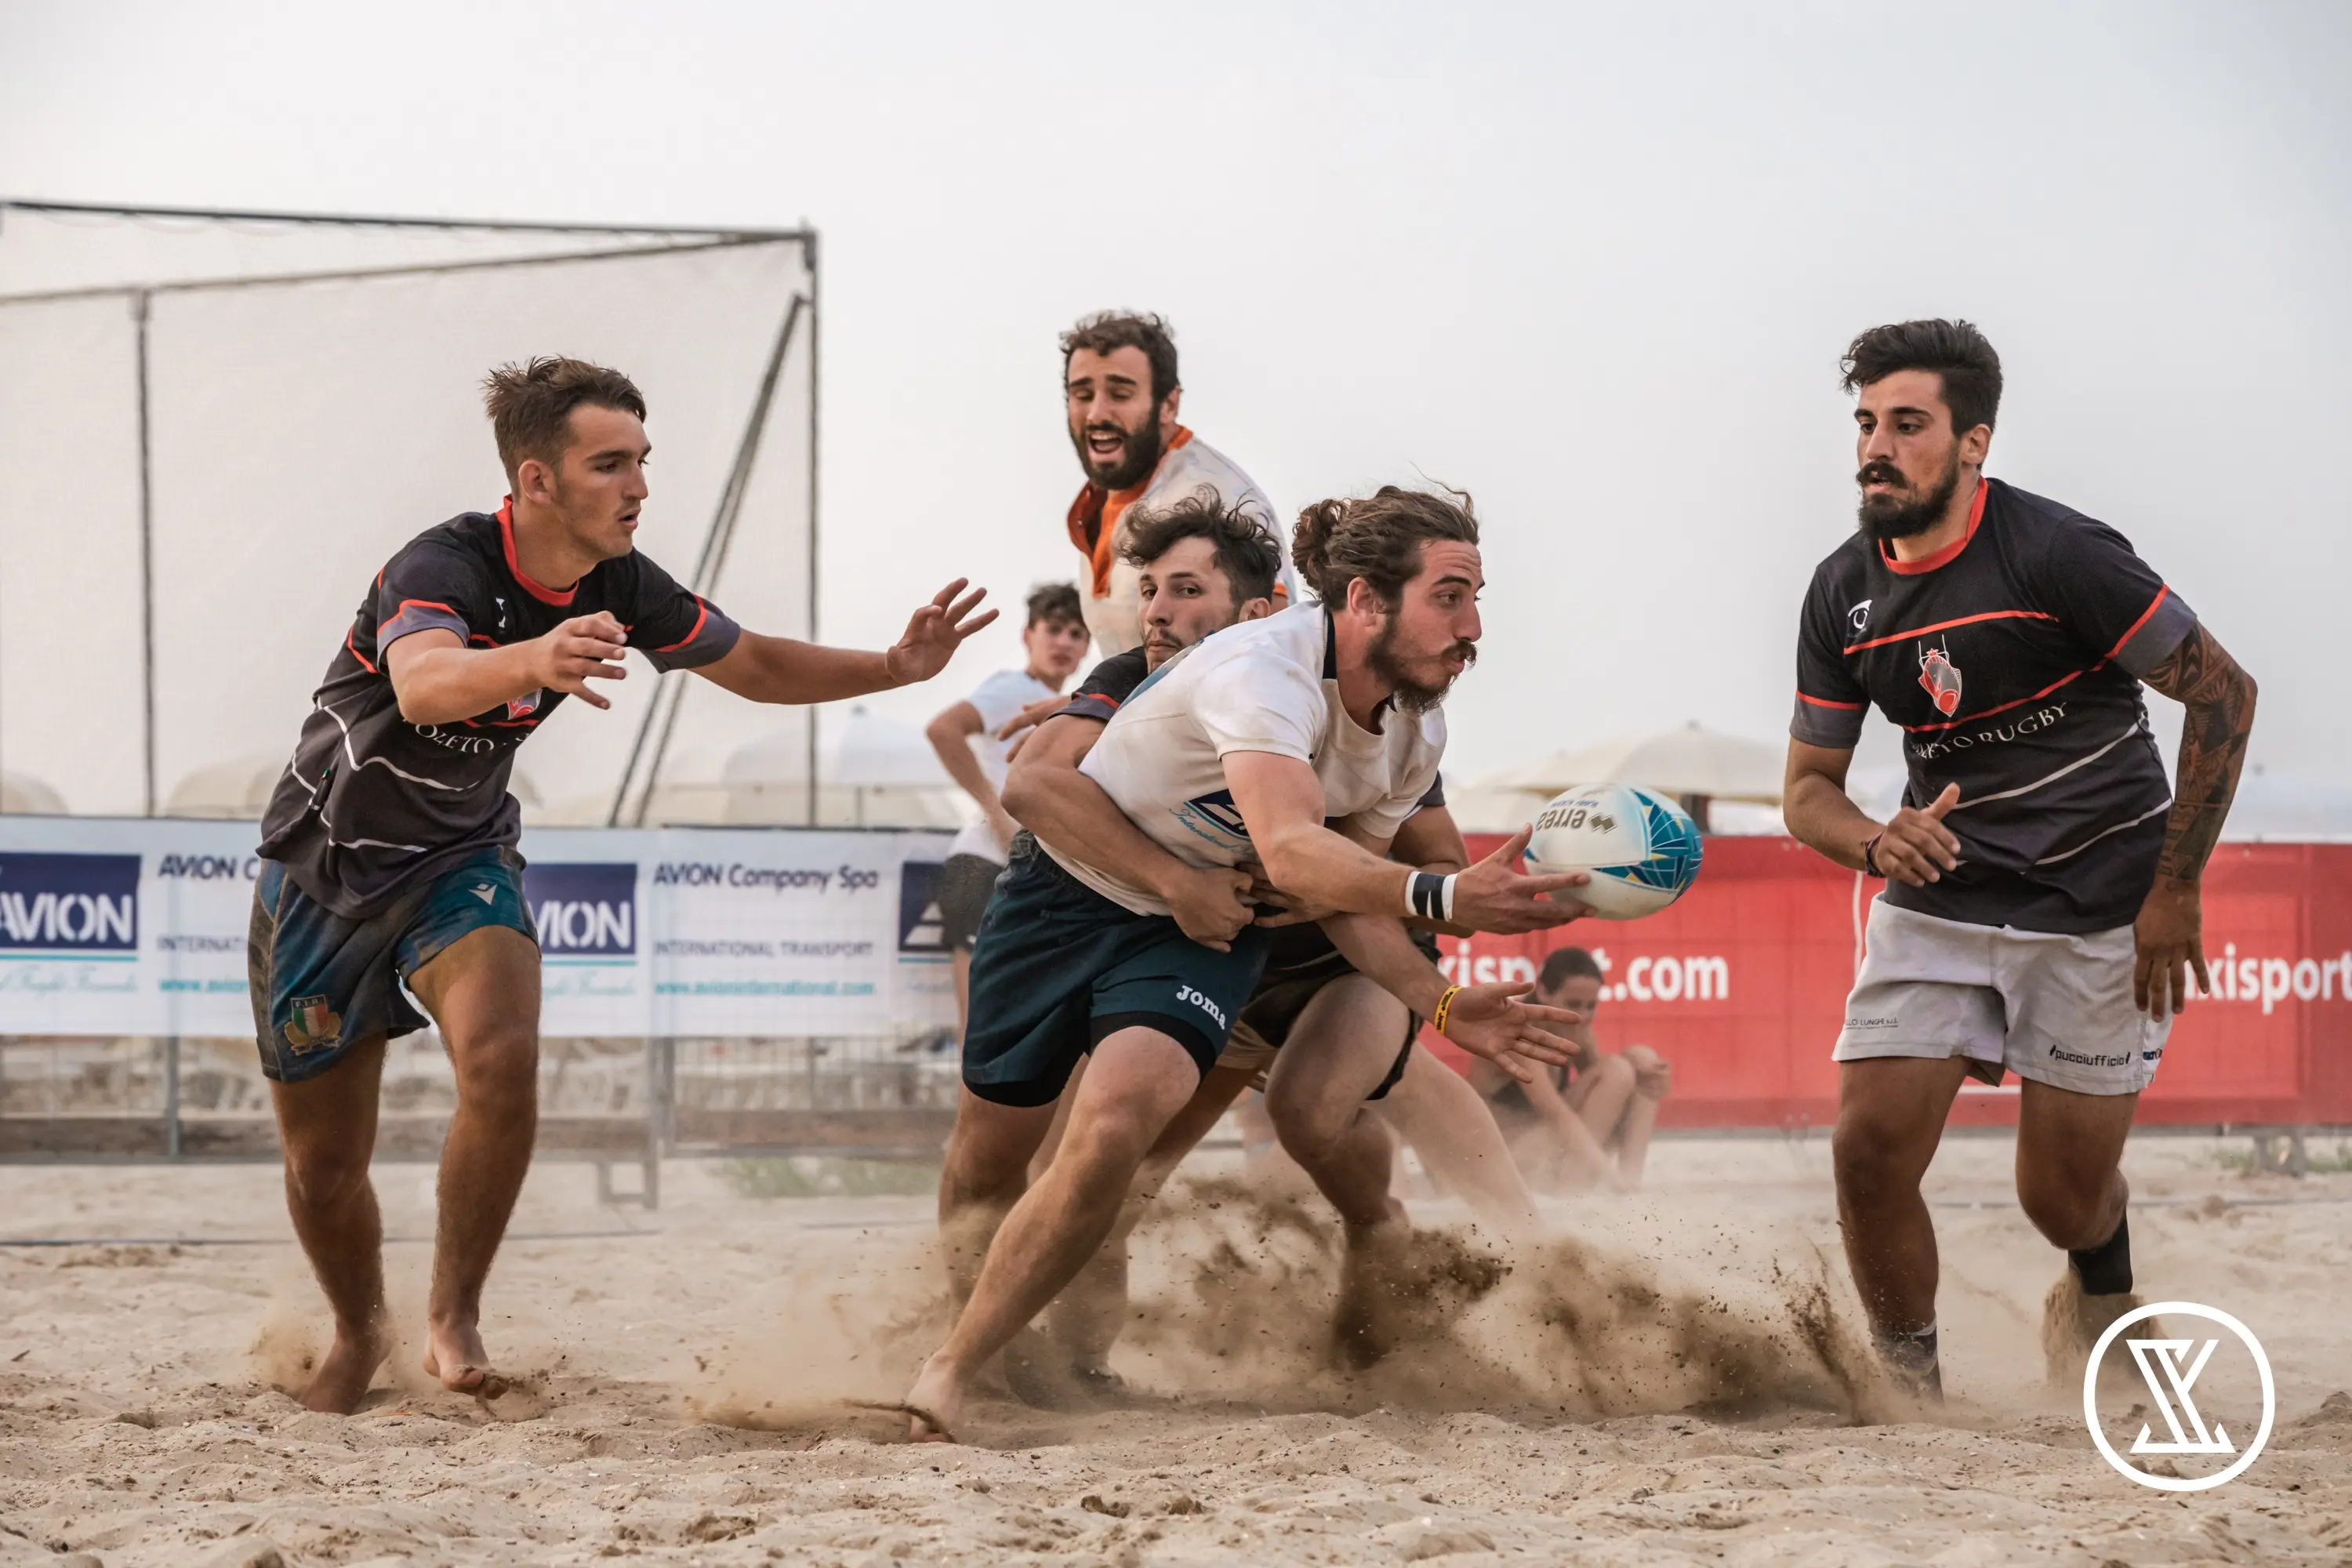 Avion sponsorships for beach rugby - 3